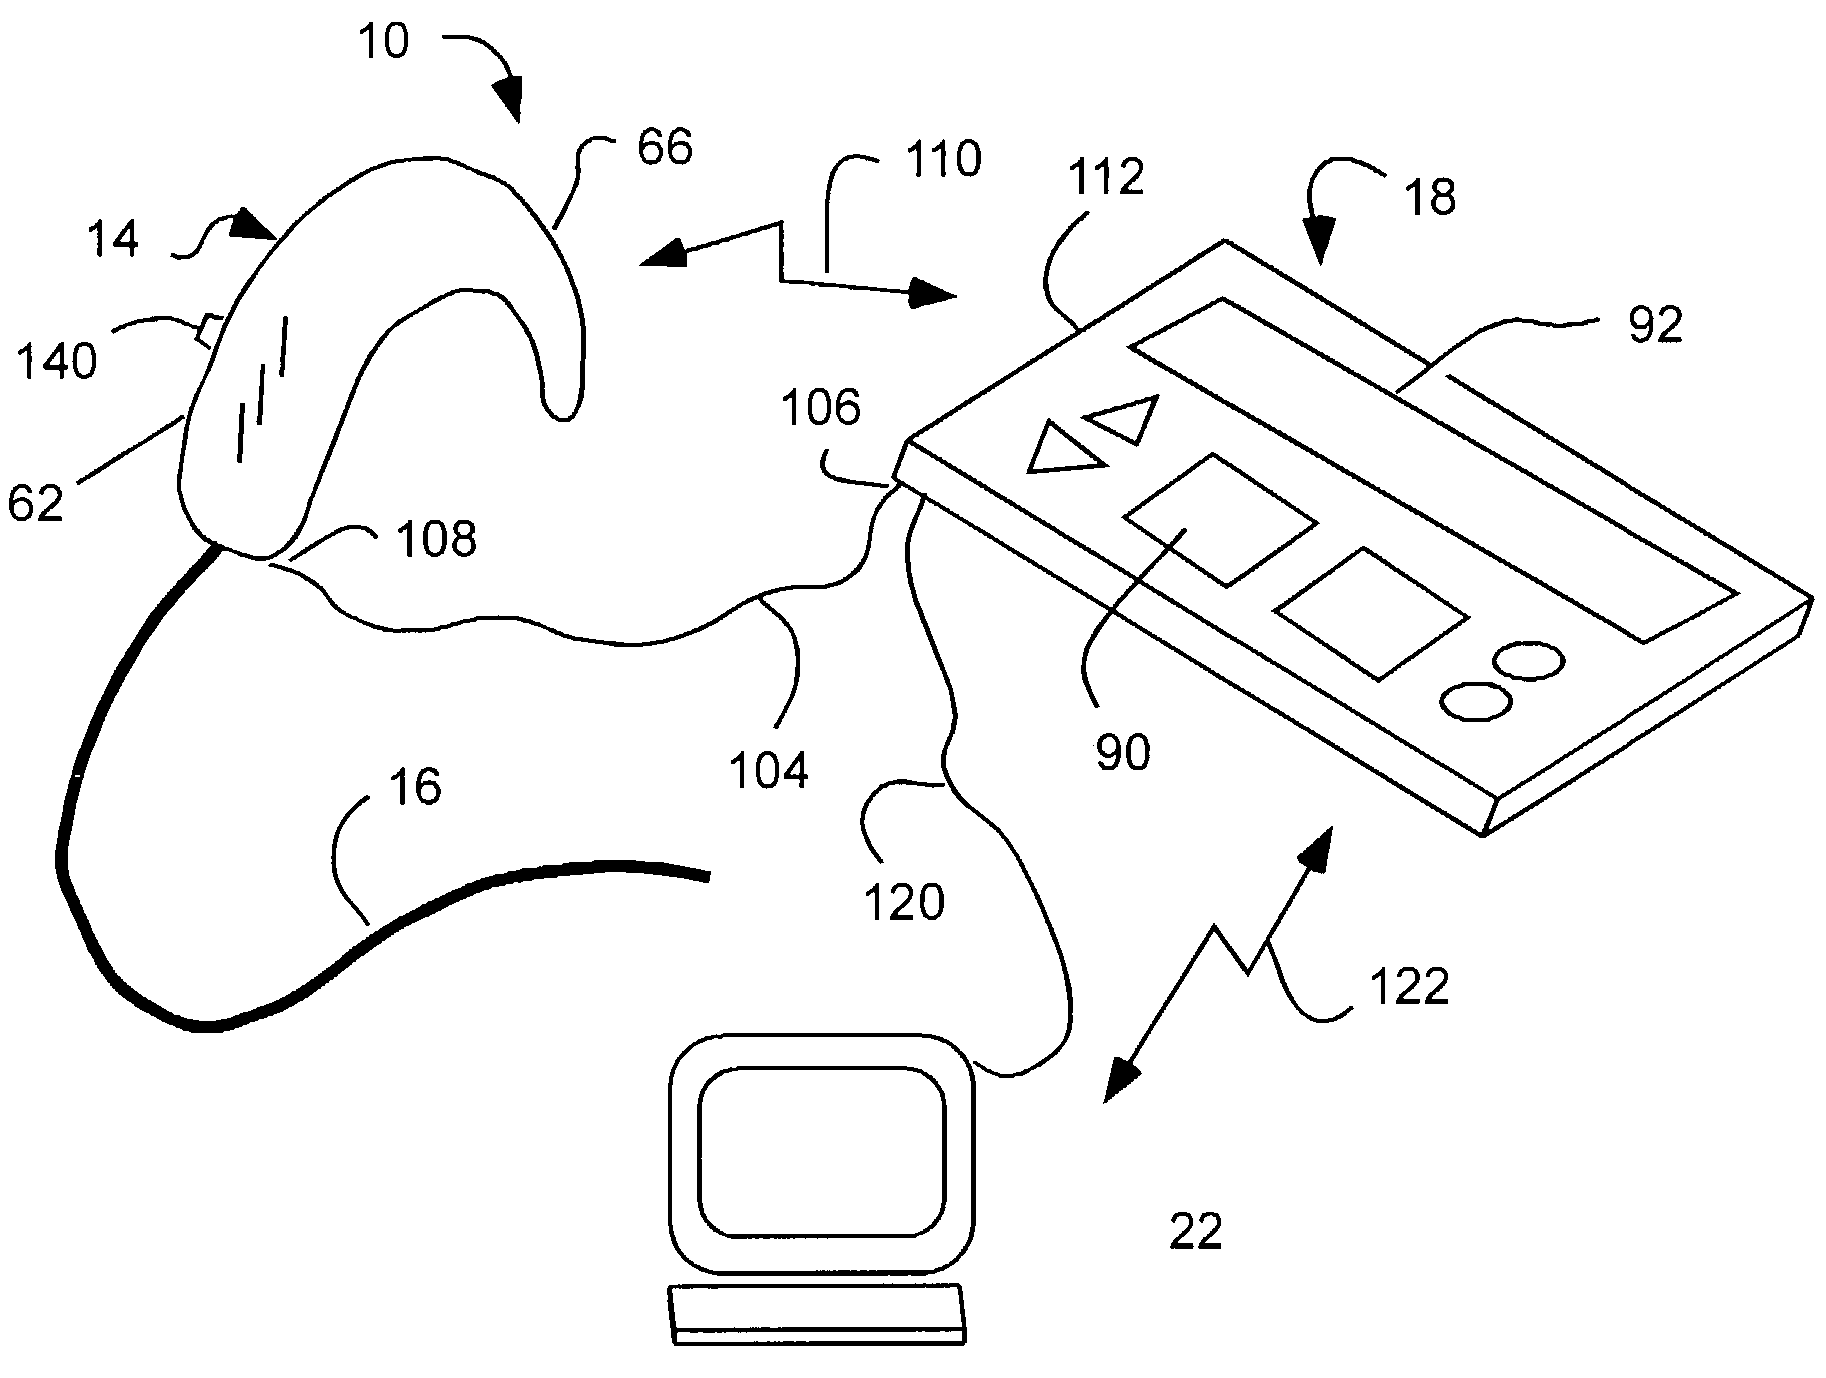 Cochlear drug delivery system and method